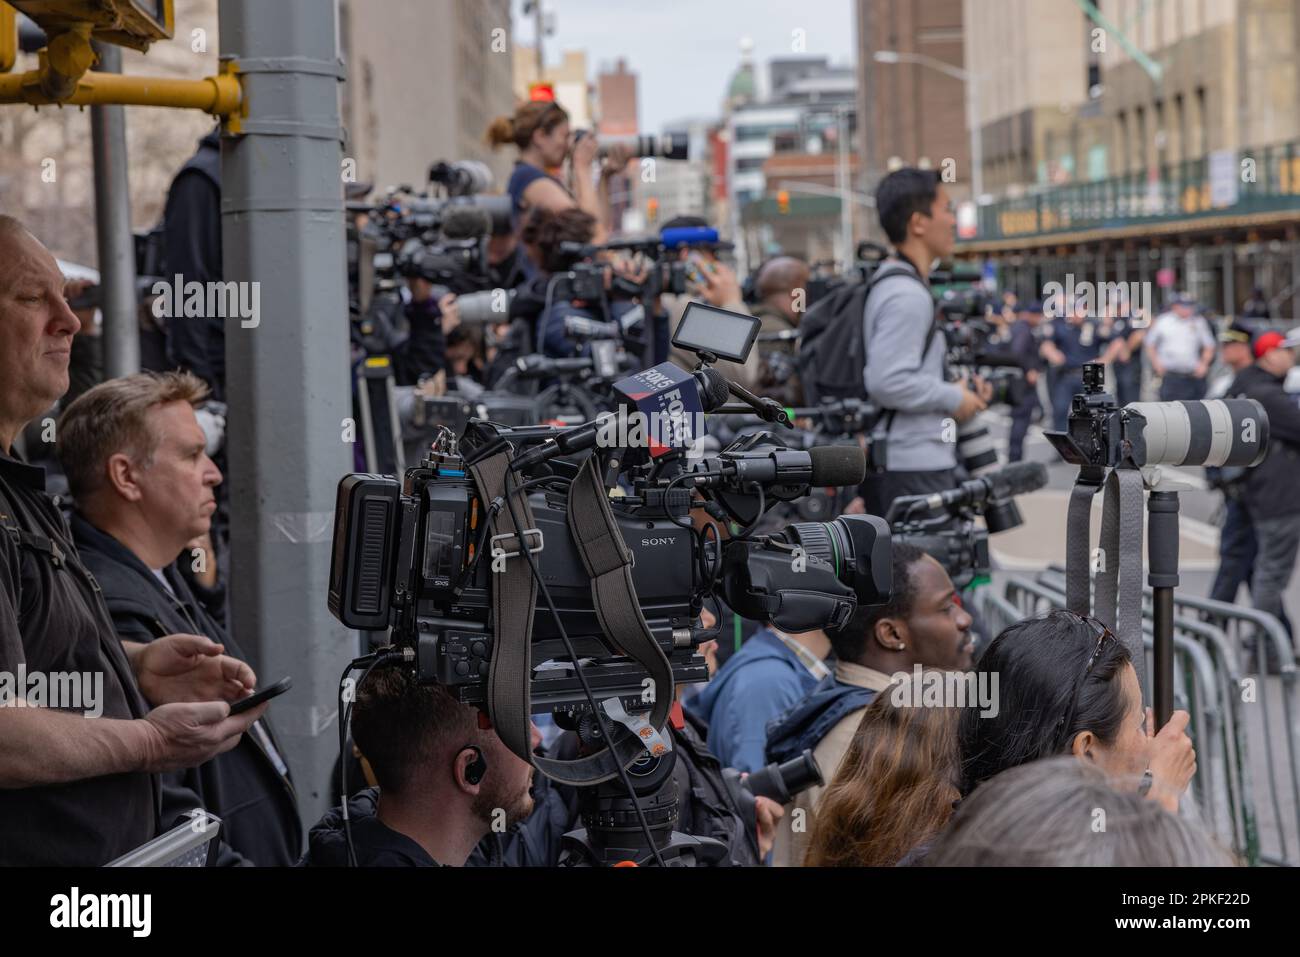 NEW YORK, N.Y. – April 4, 2023: Members of the media gather in Lower Manhattan to cover an arraignment hearing for former President Donald Trump. Stock Photo